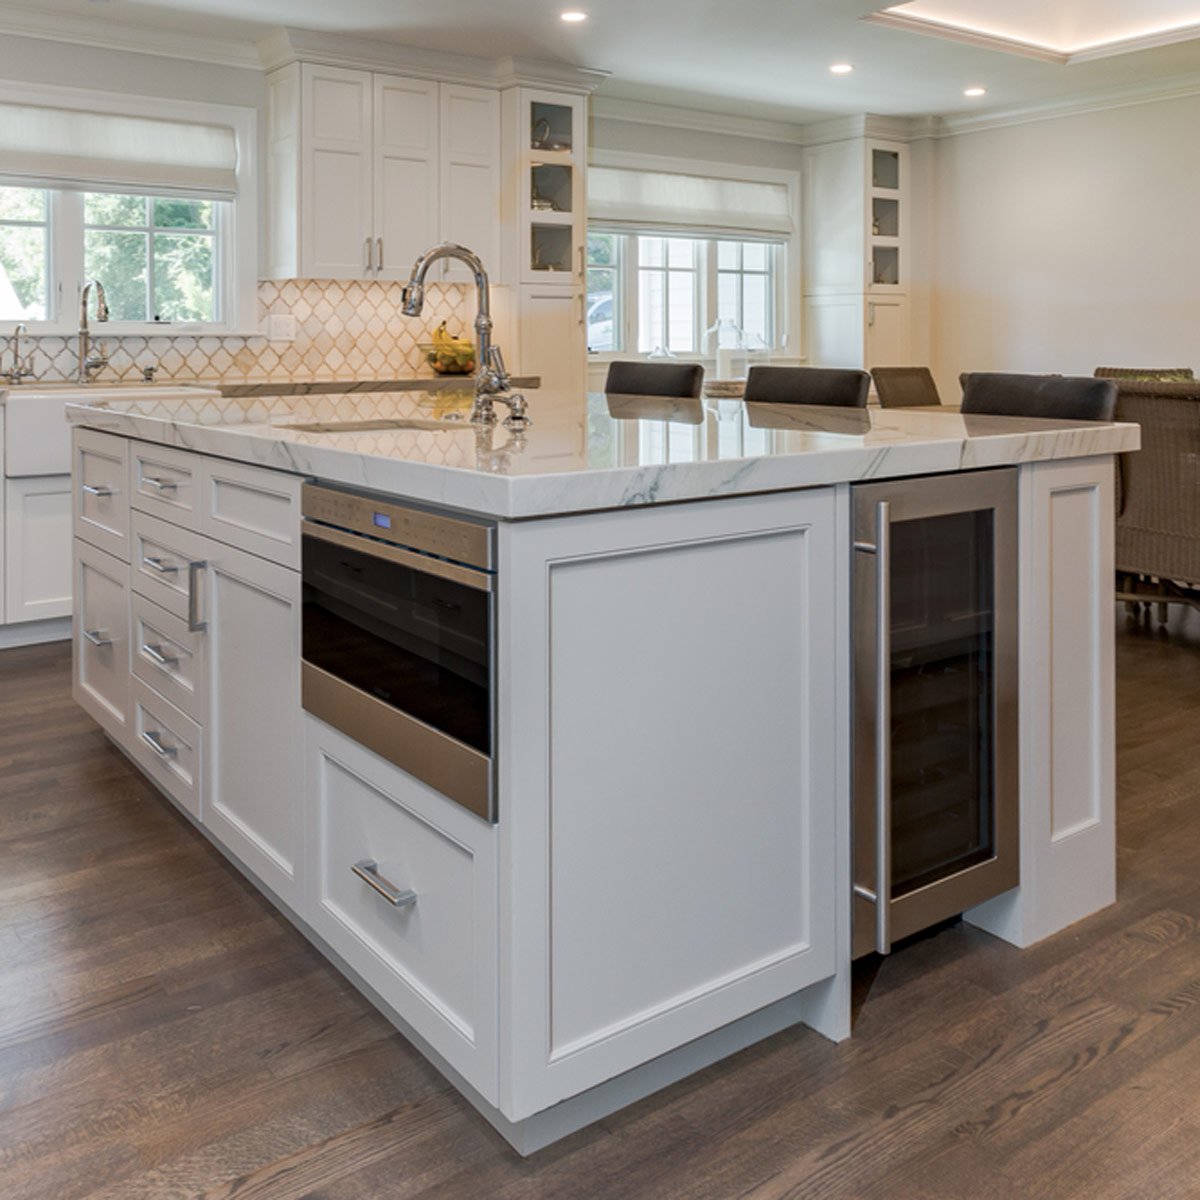 Kitchen island ideas integrate devices into your kitchen island DHVDREL